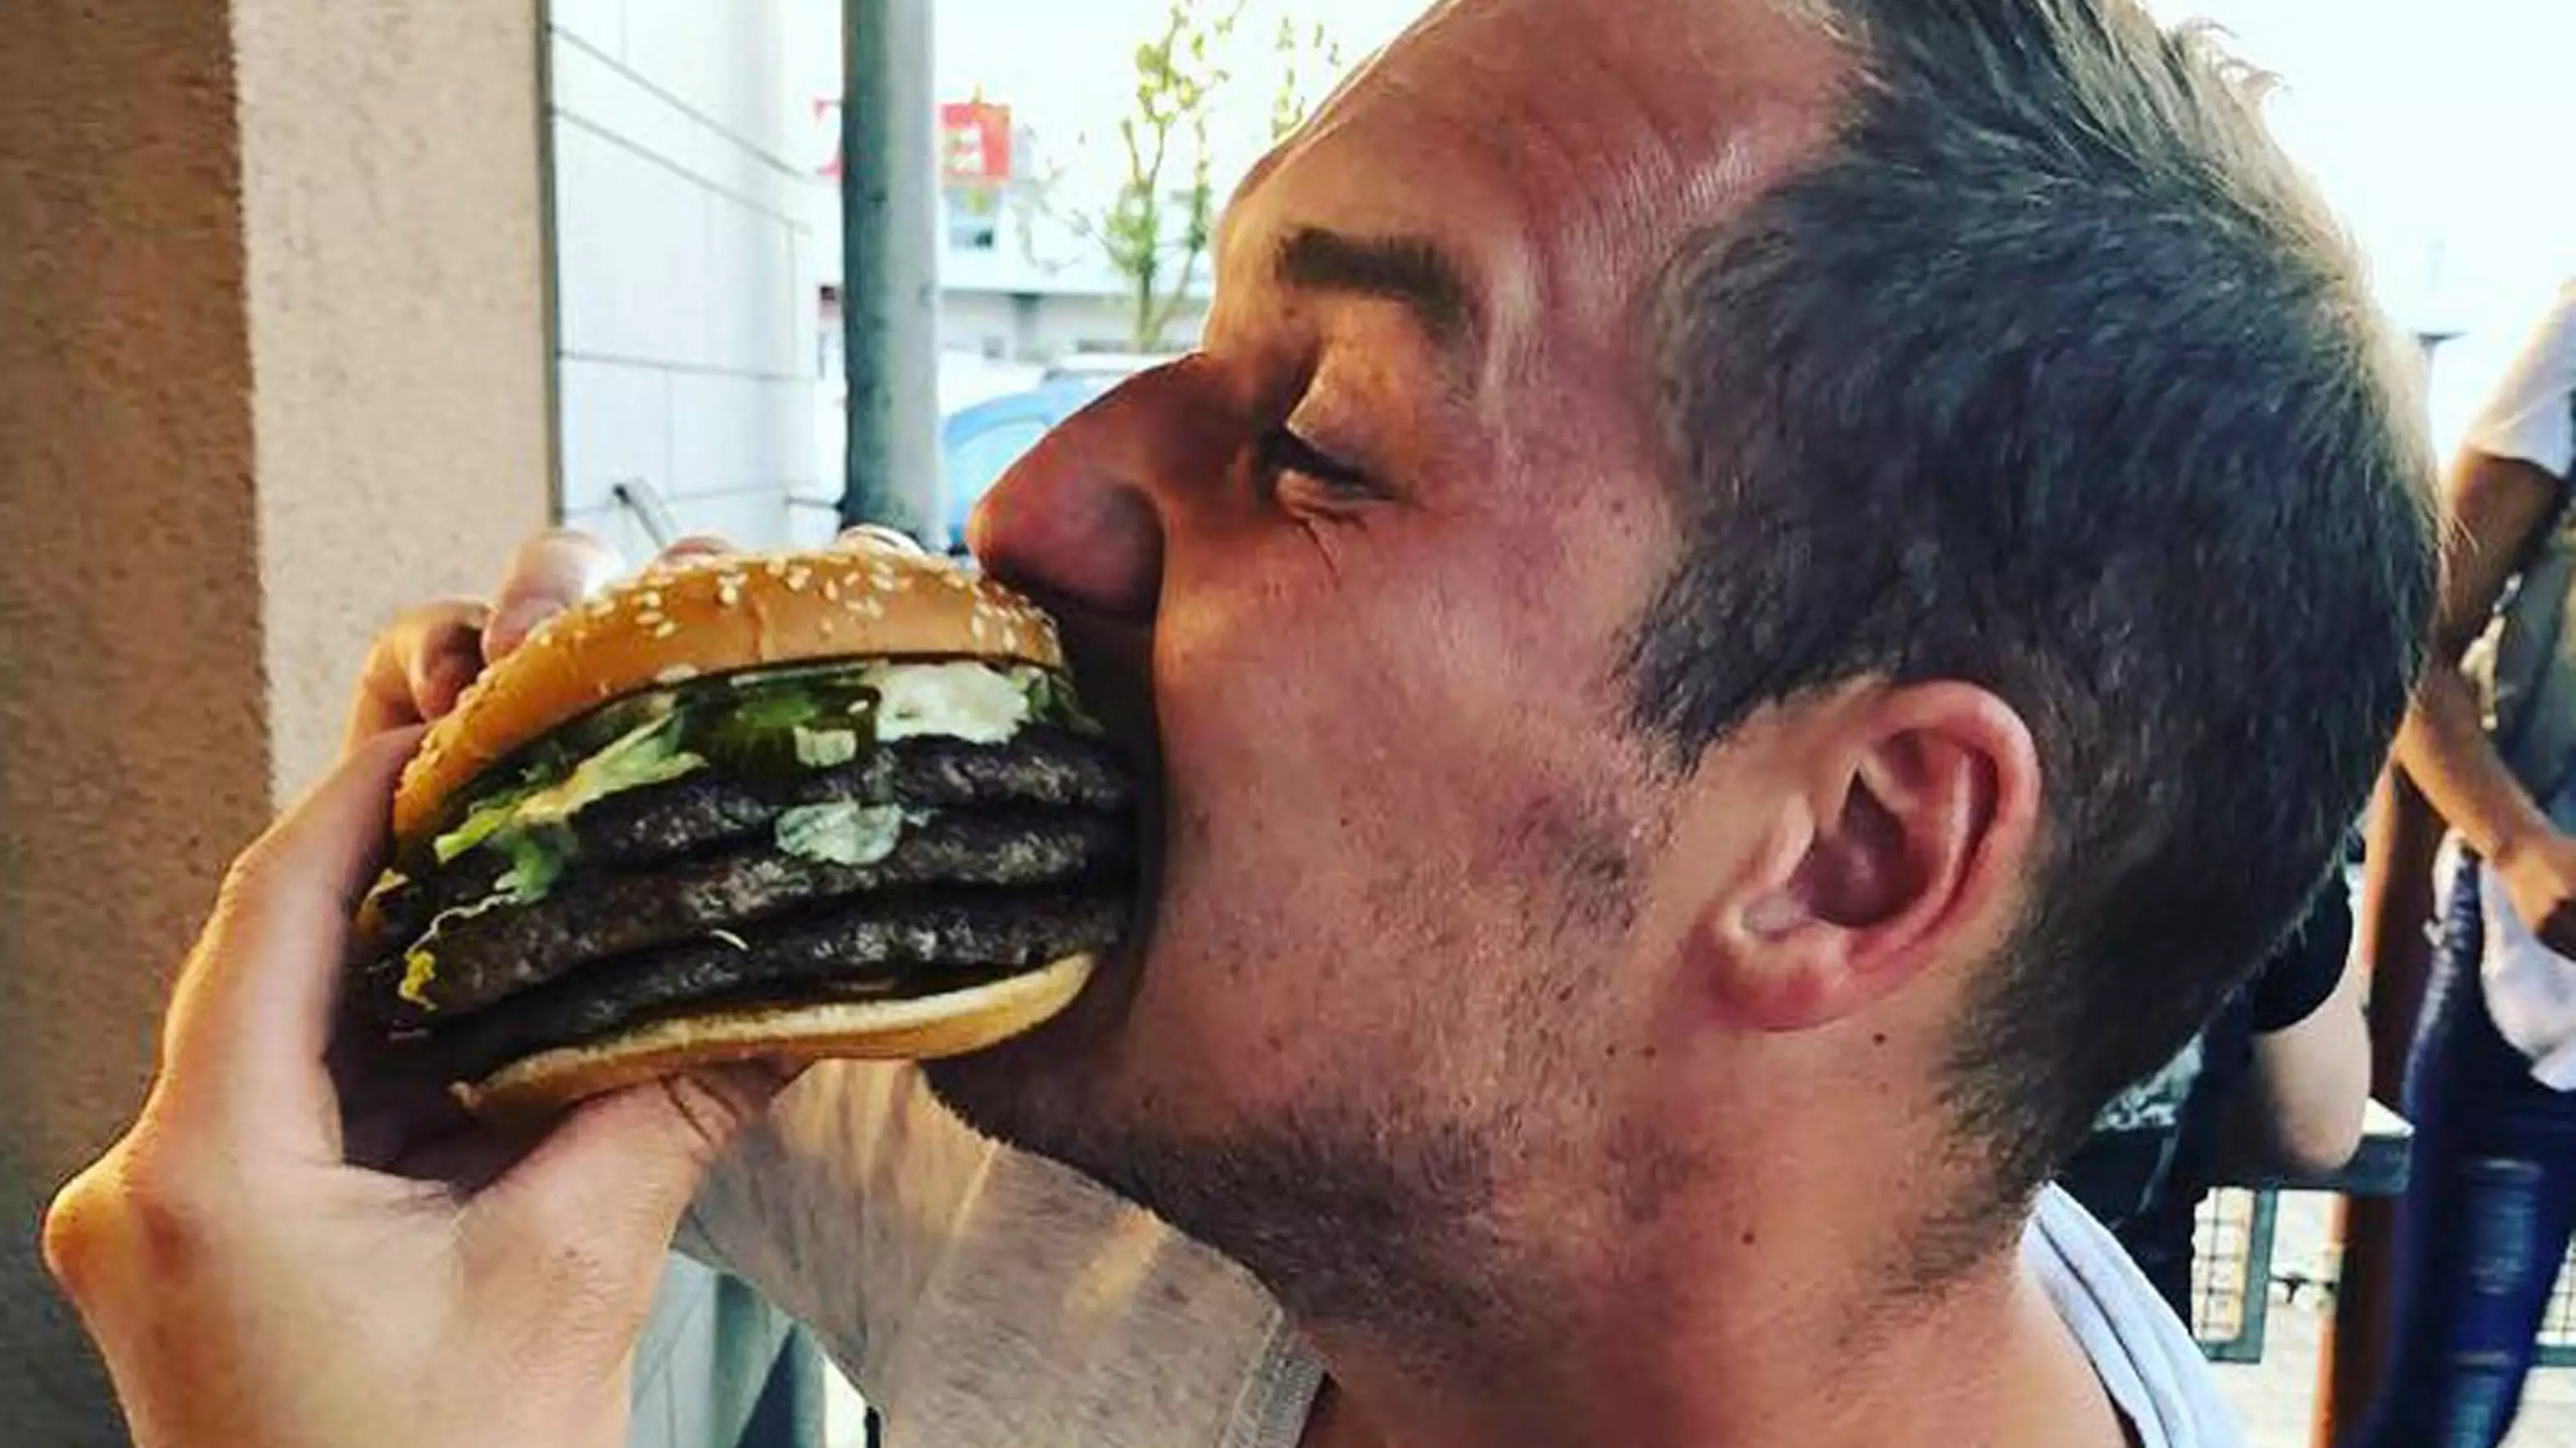 McDonald's Addicted Man Has Eaten A Burger Every Other Day For Over Two Decades